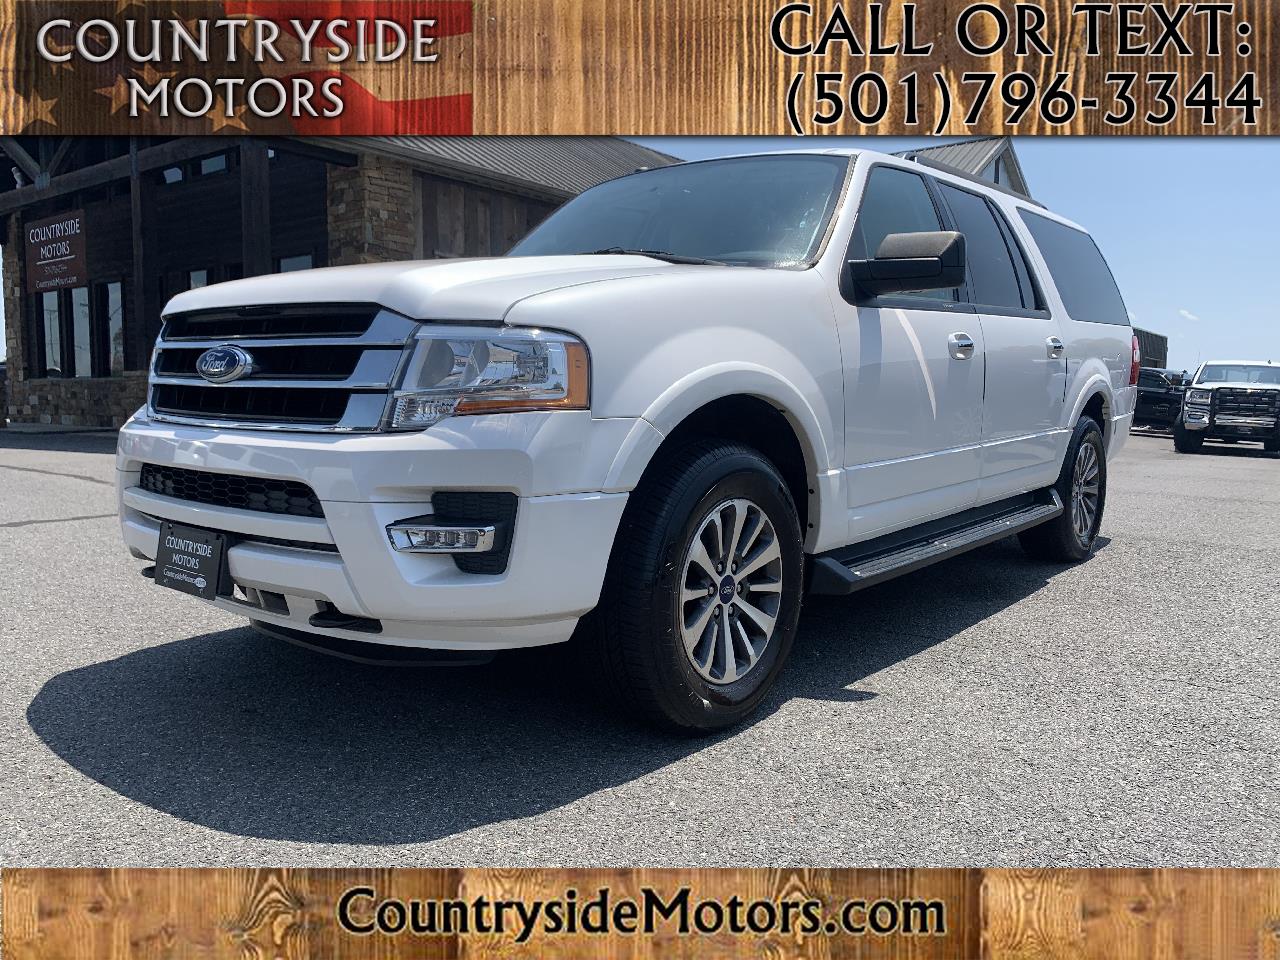 Used 2017 Ford Expedition EL XLT 4WD for Sale in Conway AR 72032  CountrysideMotors.com